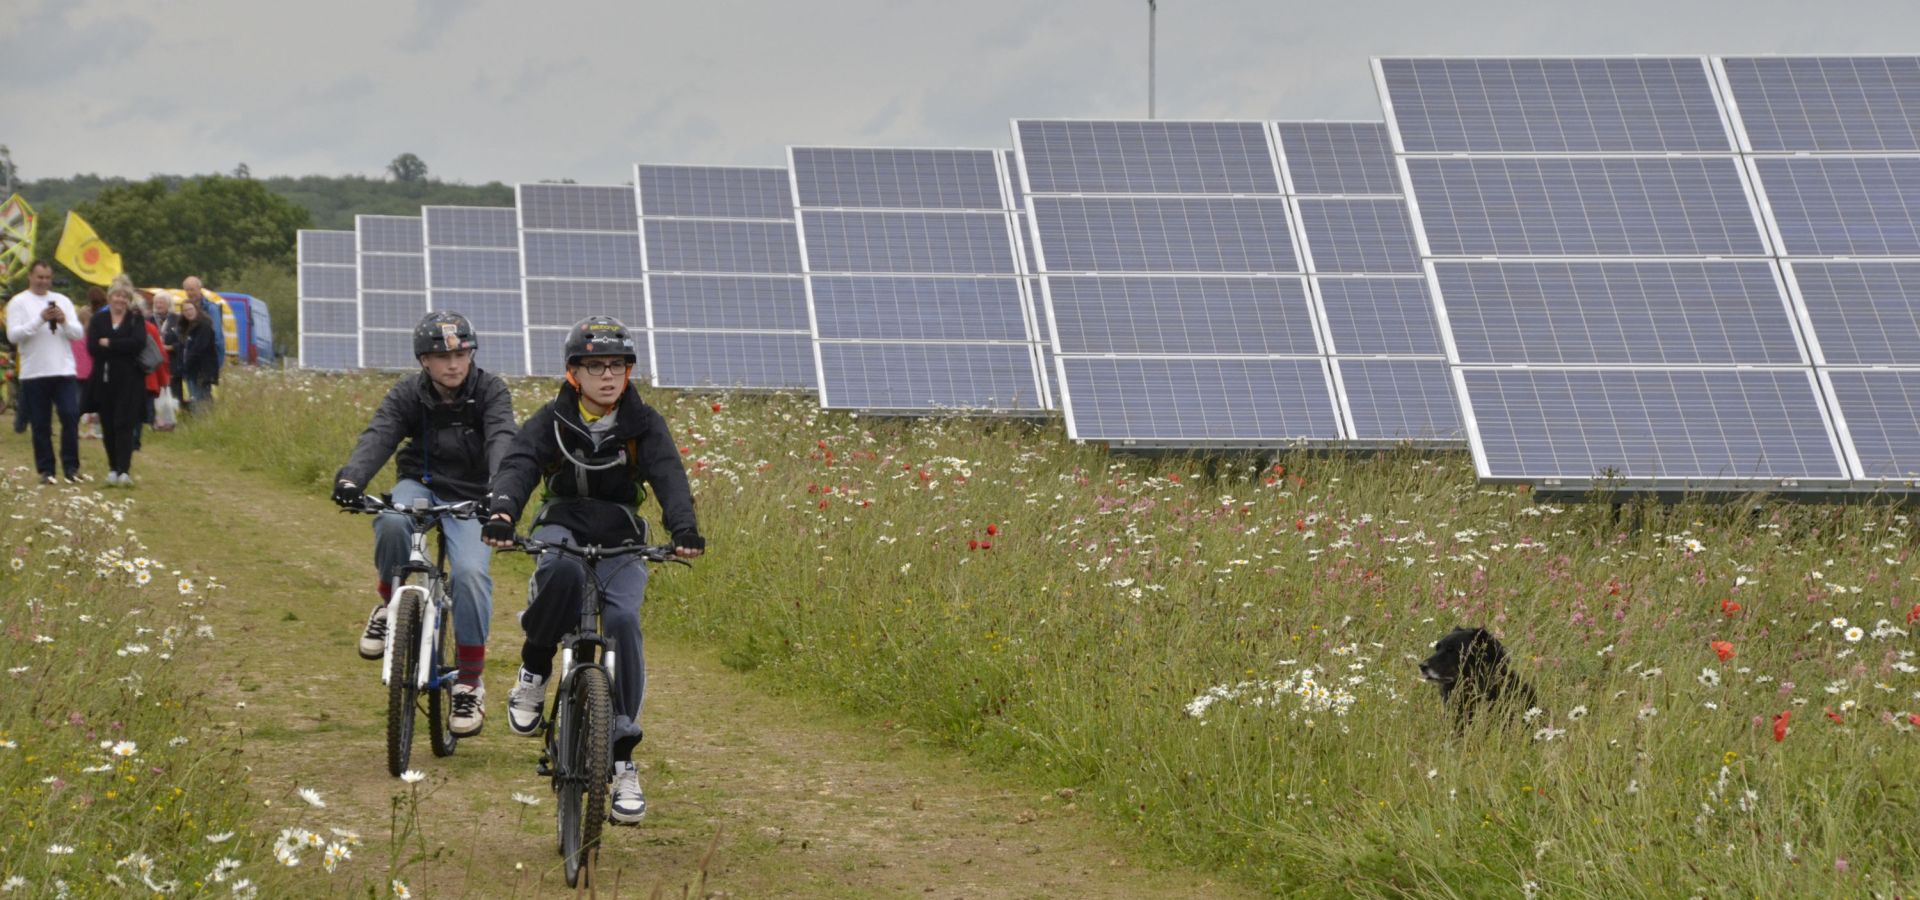 Visitors to the Westmill Solar Cooperative in the UK riding bikes in a field in front of solar panels